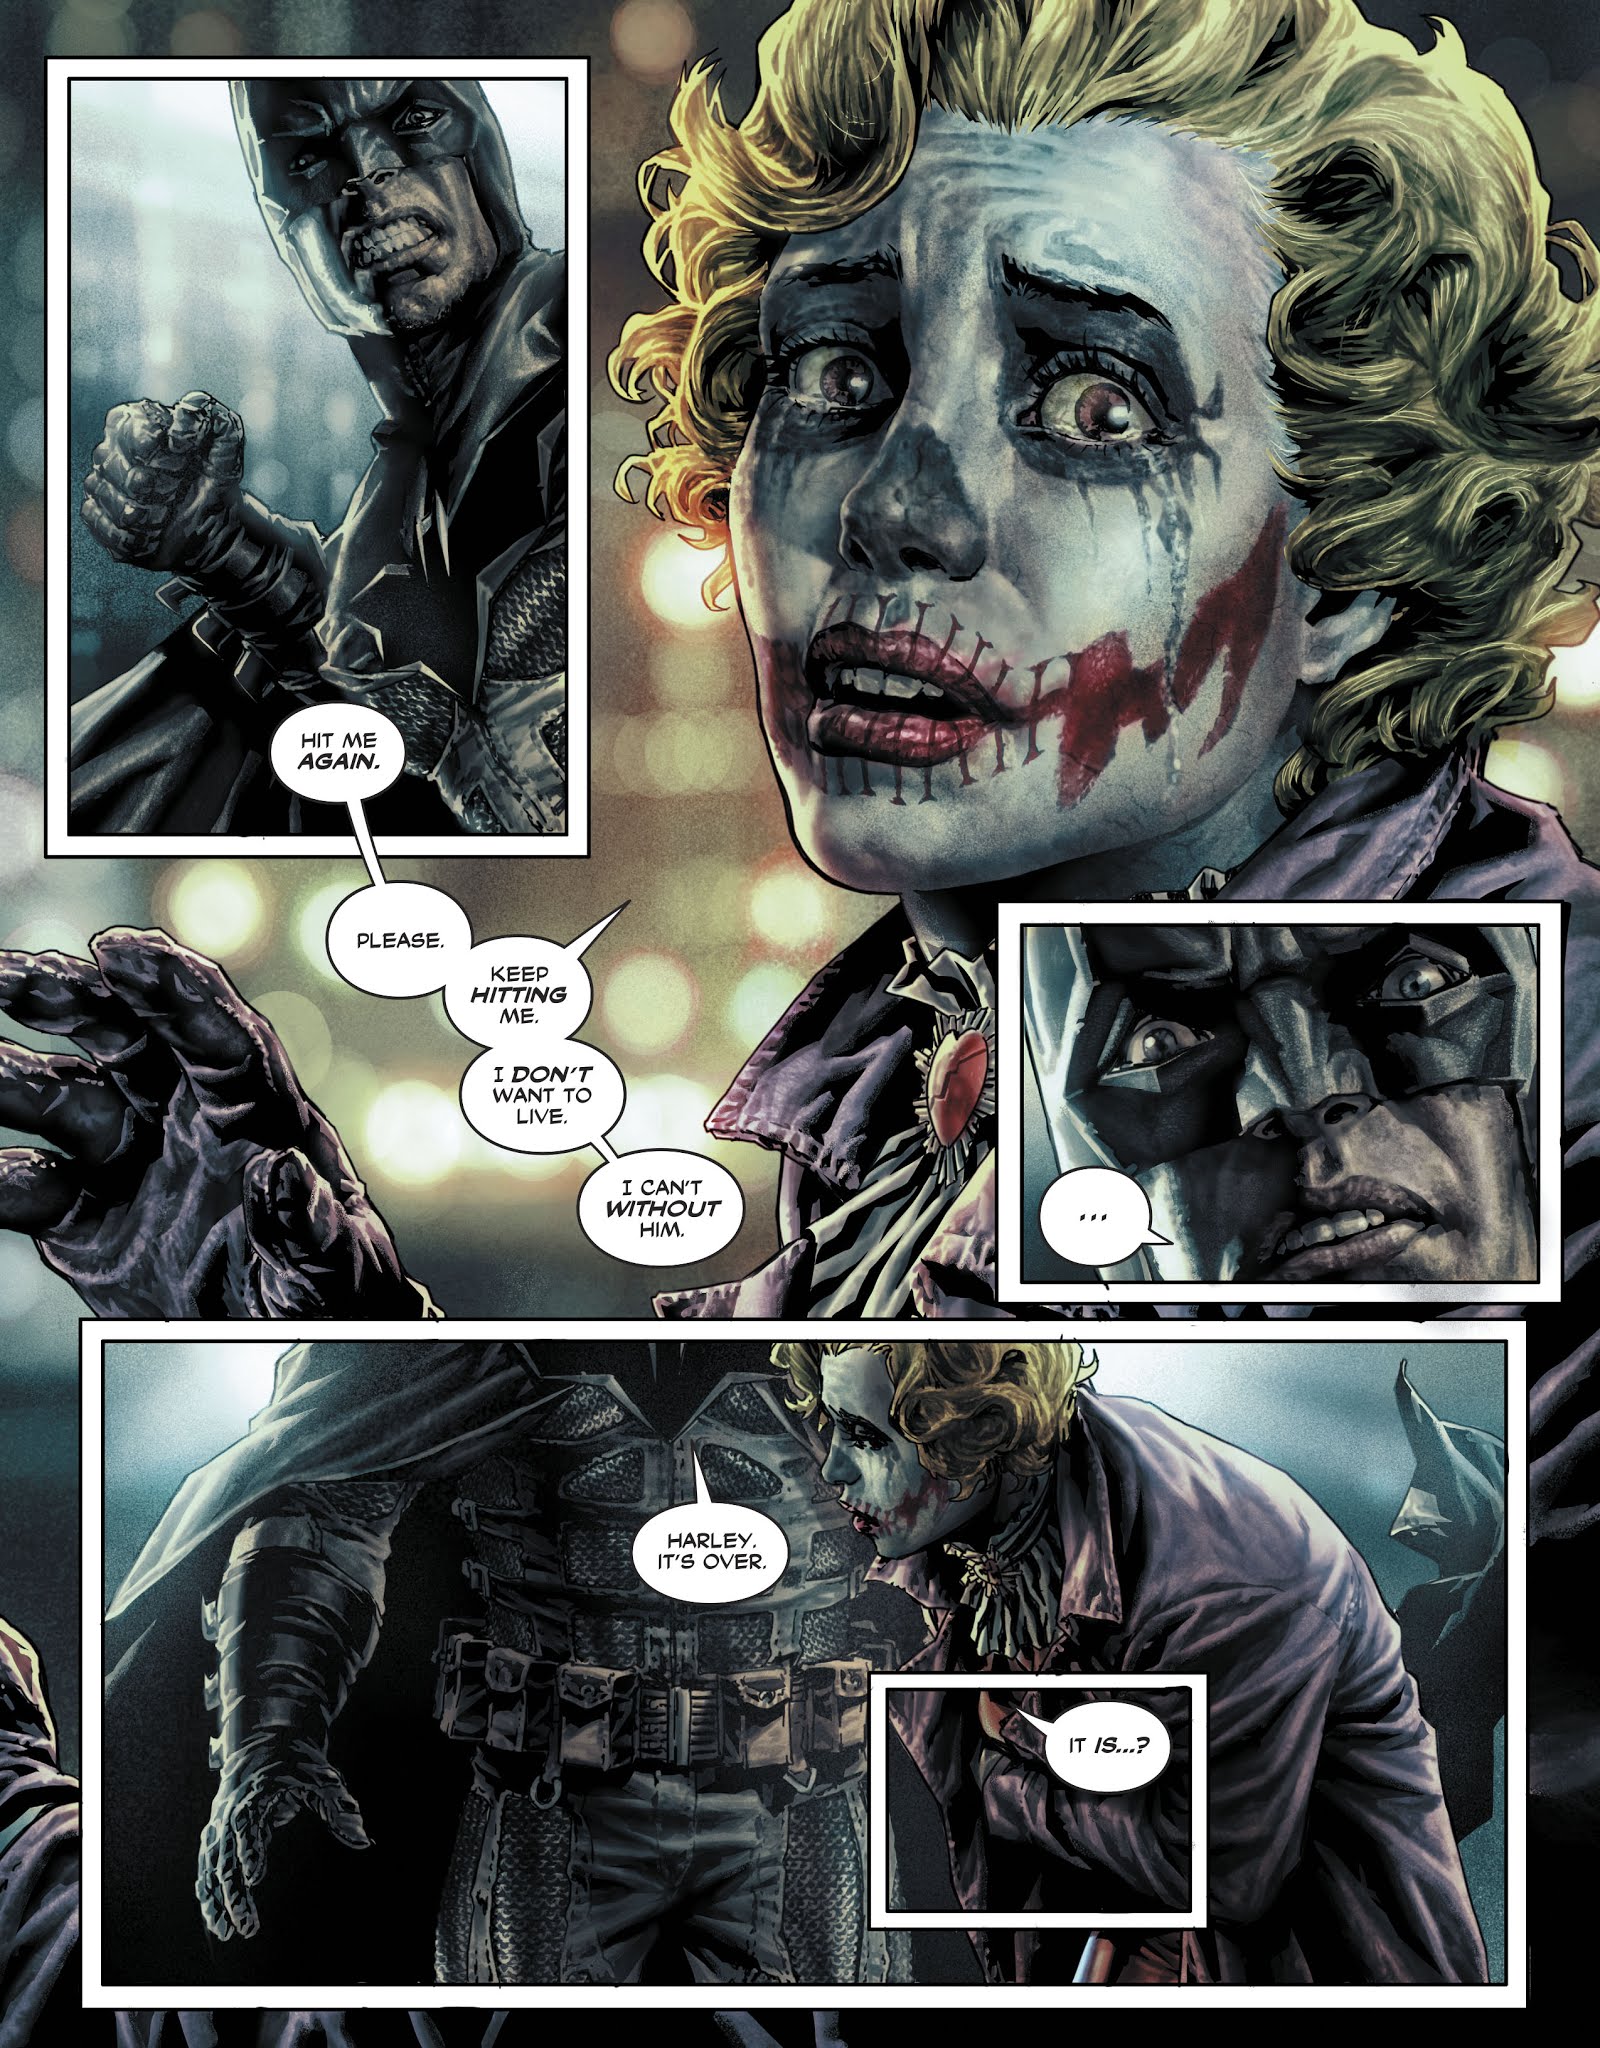 Batman Damned Issue 2 | Read Batman Damned Issue 2 comic online in high  quality. Read Full Comic online for free - Read comics online in high  quality .| READ COMIC ONLINE